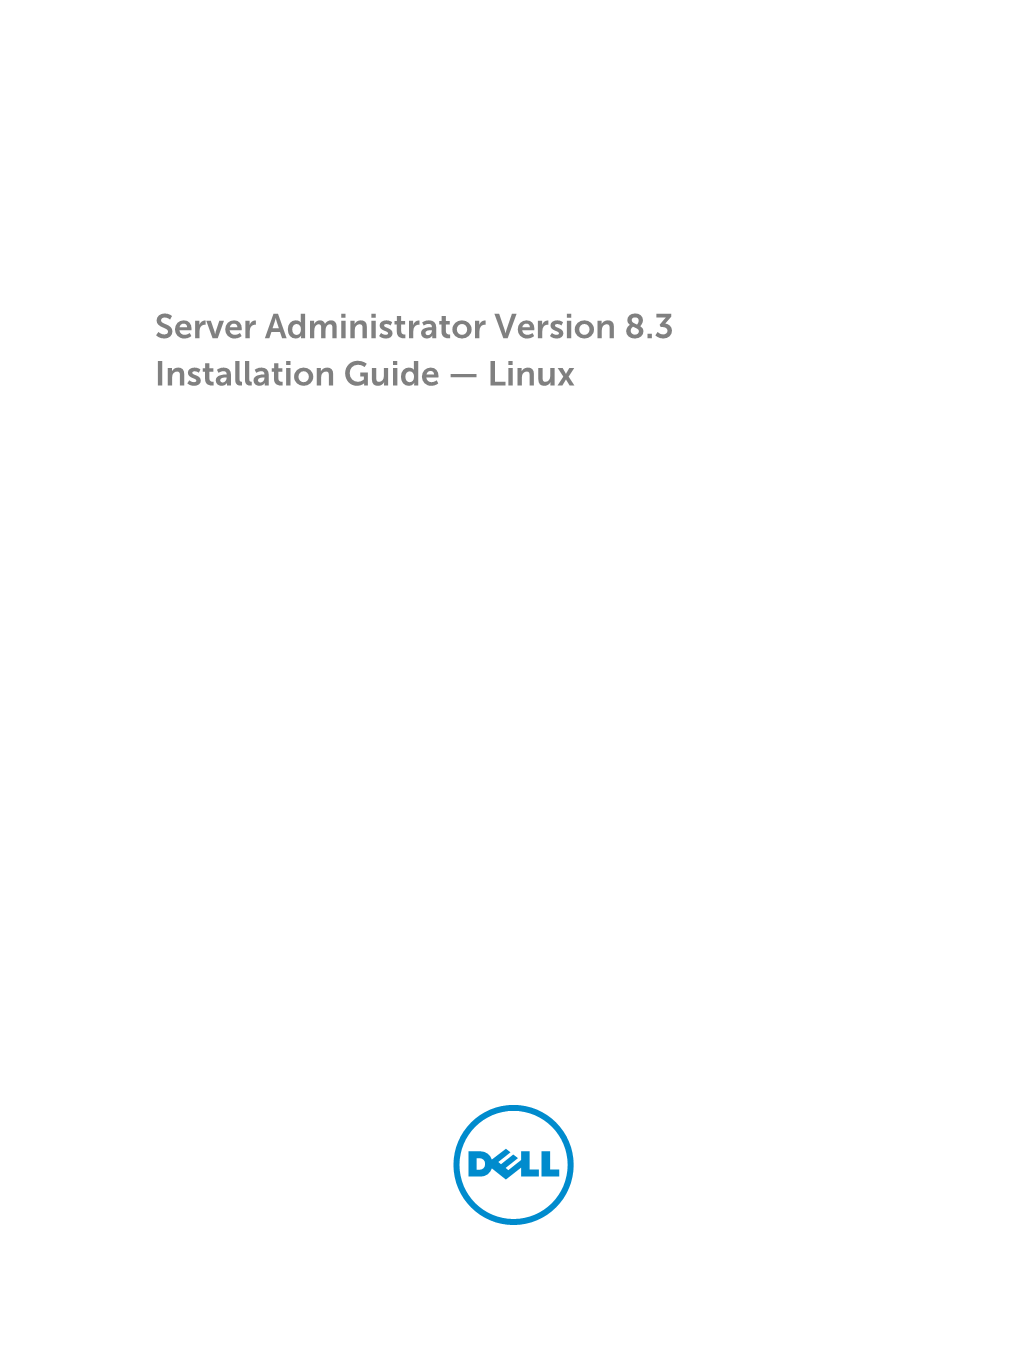 Server Administrator Version 8.3 Installation Guide — Linux Notes, Cautions, and Warnings